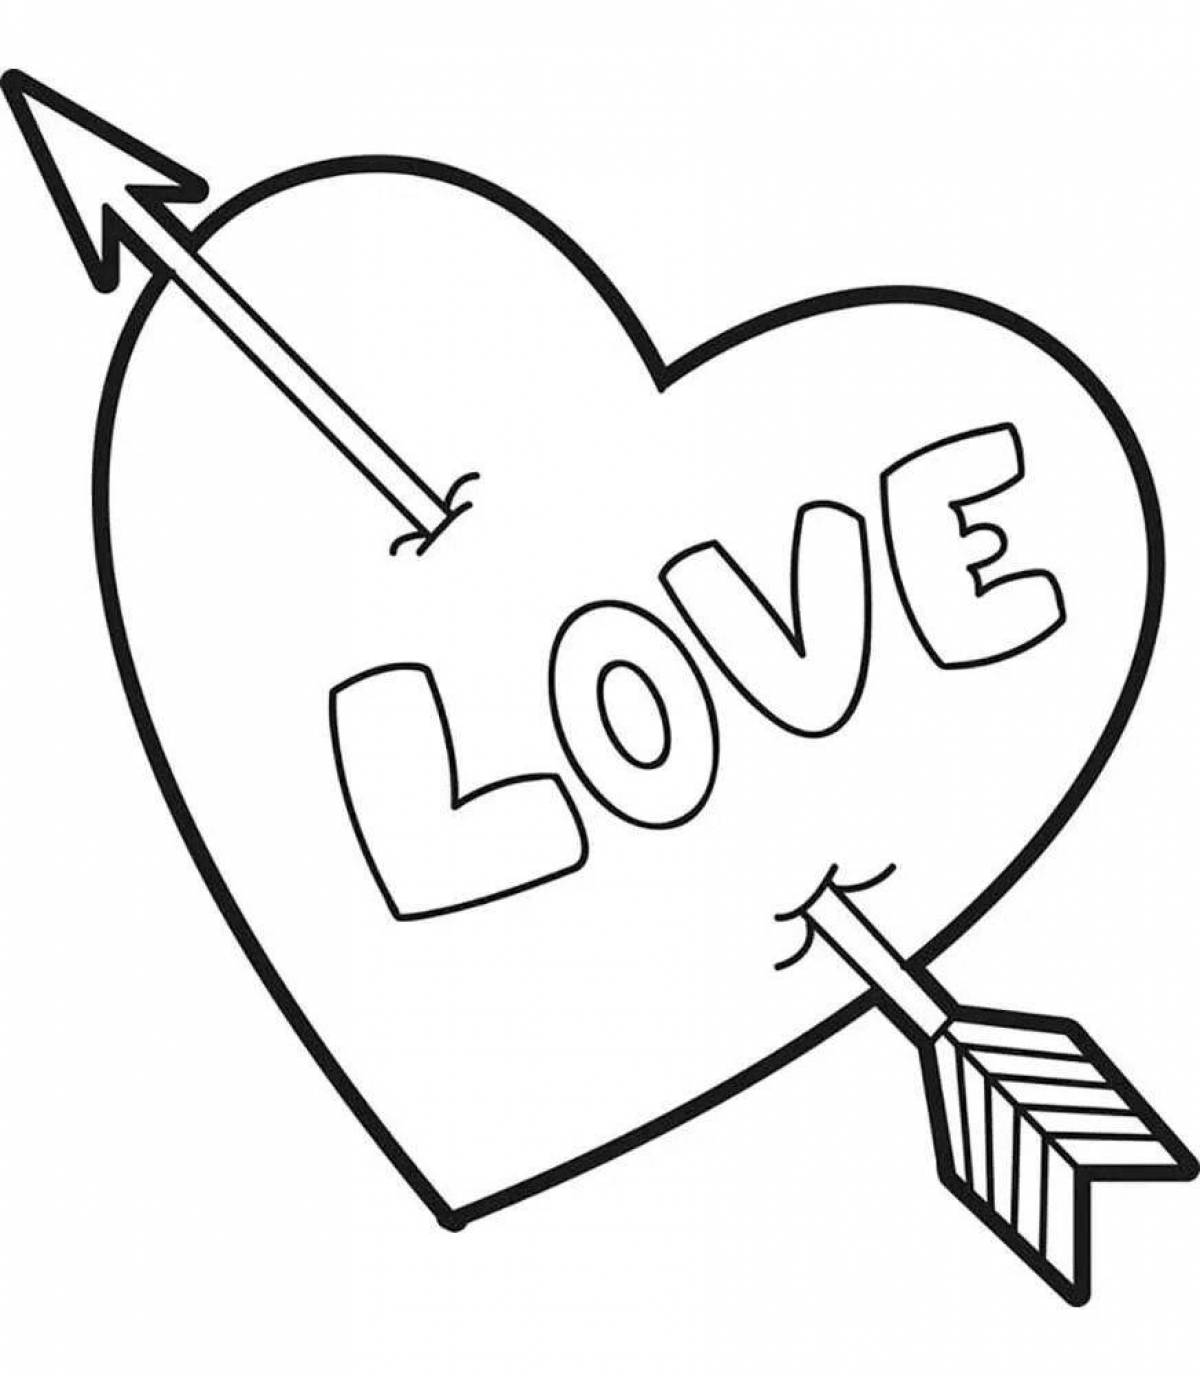 Coloring page exuberant I love you